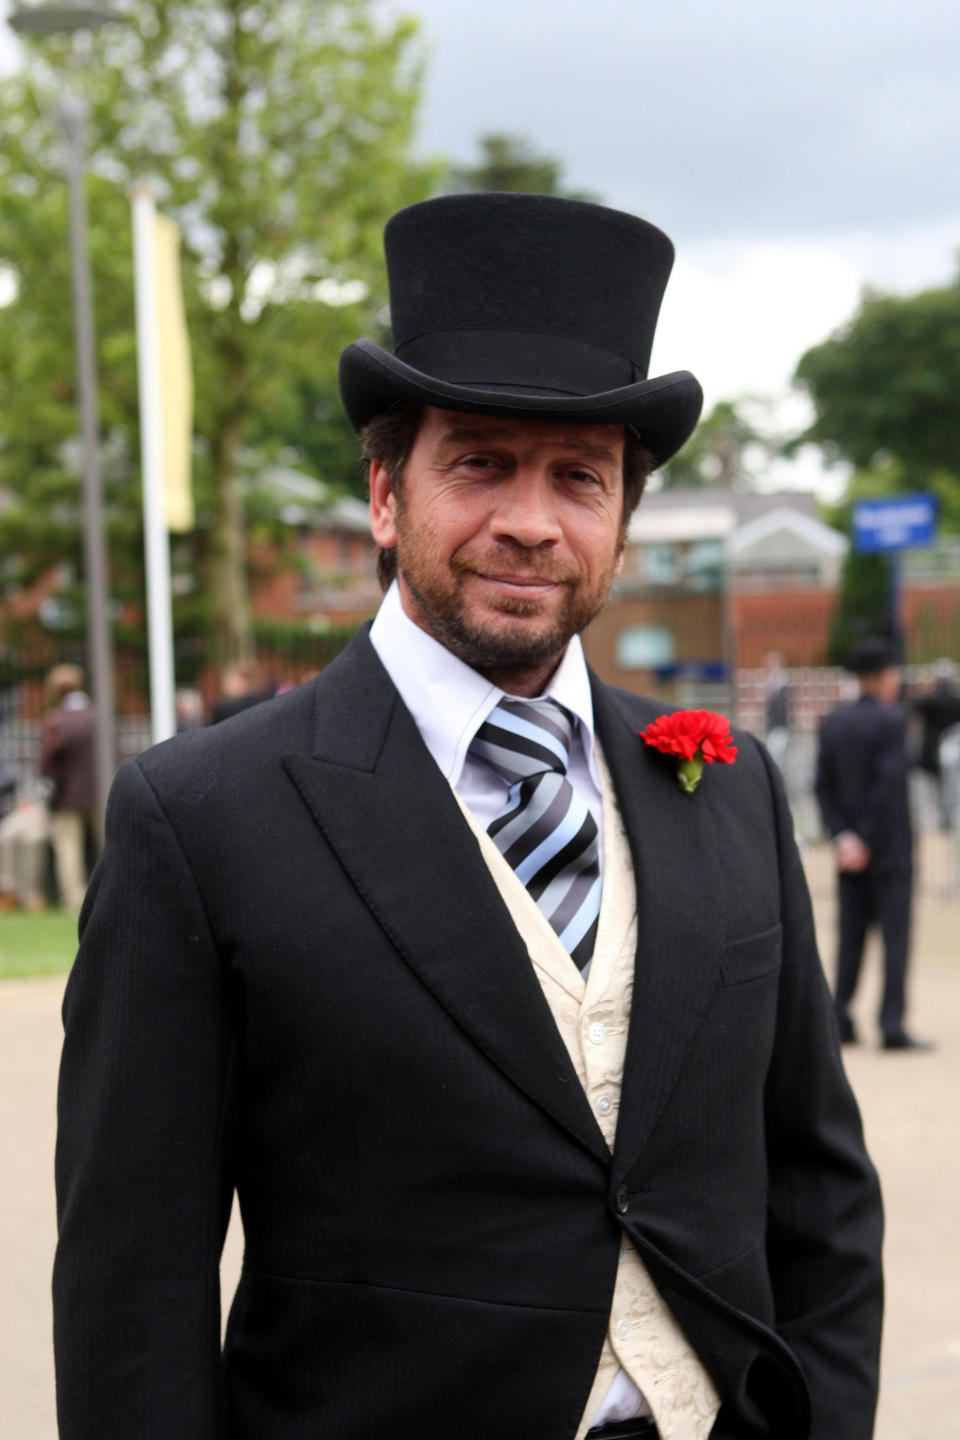 Television presenter Nick Knowles arrives for the second day at Ascot Racecourse, Berkshire.